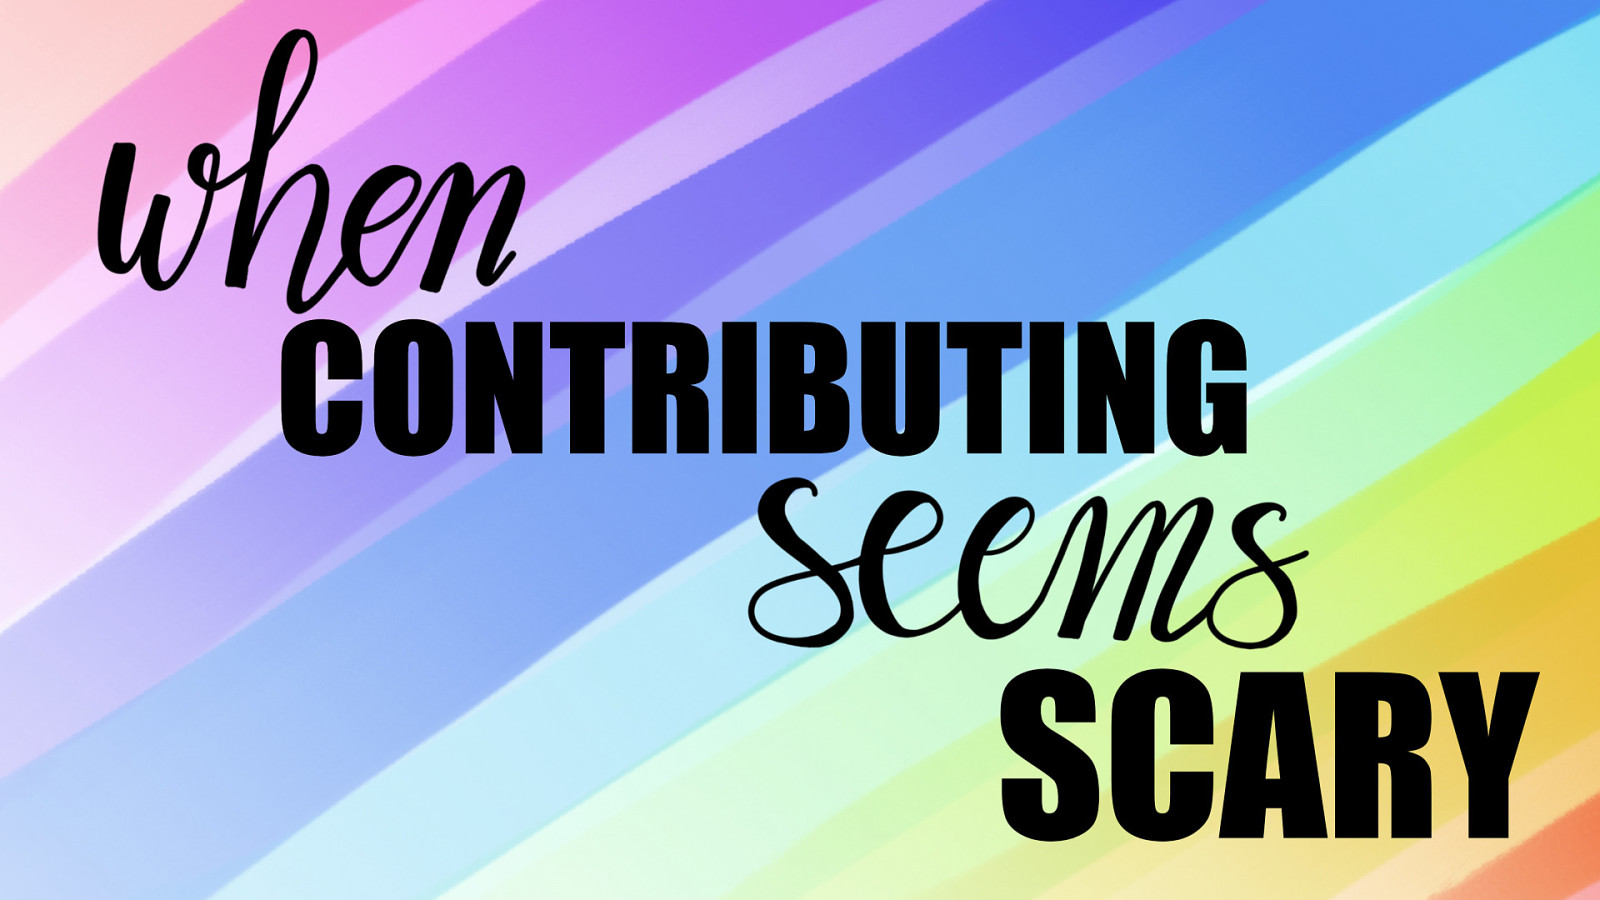 When contributing seems scary